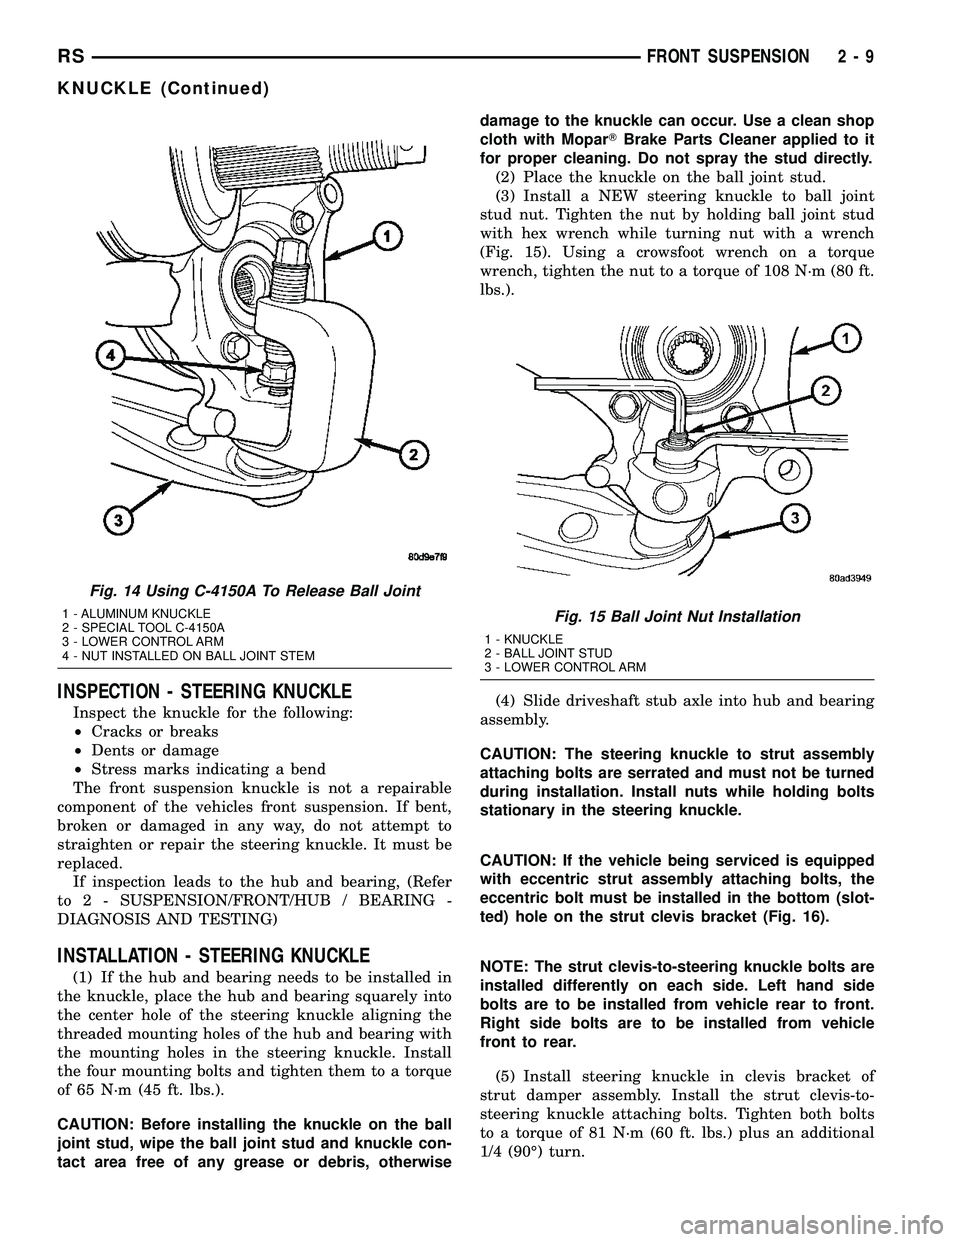 CHRYSLER VOYAGER 2004  Service Manual INSPECTION - STEERING KNUCKLE
Inspect the knuckle for the following:
²Cracks or breaks
²Dents or damage
²Stress marks indicating a bend
The front suspension knuckle is not a repairable
component of